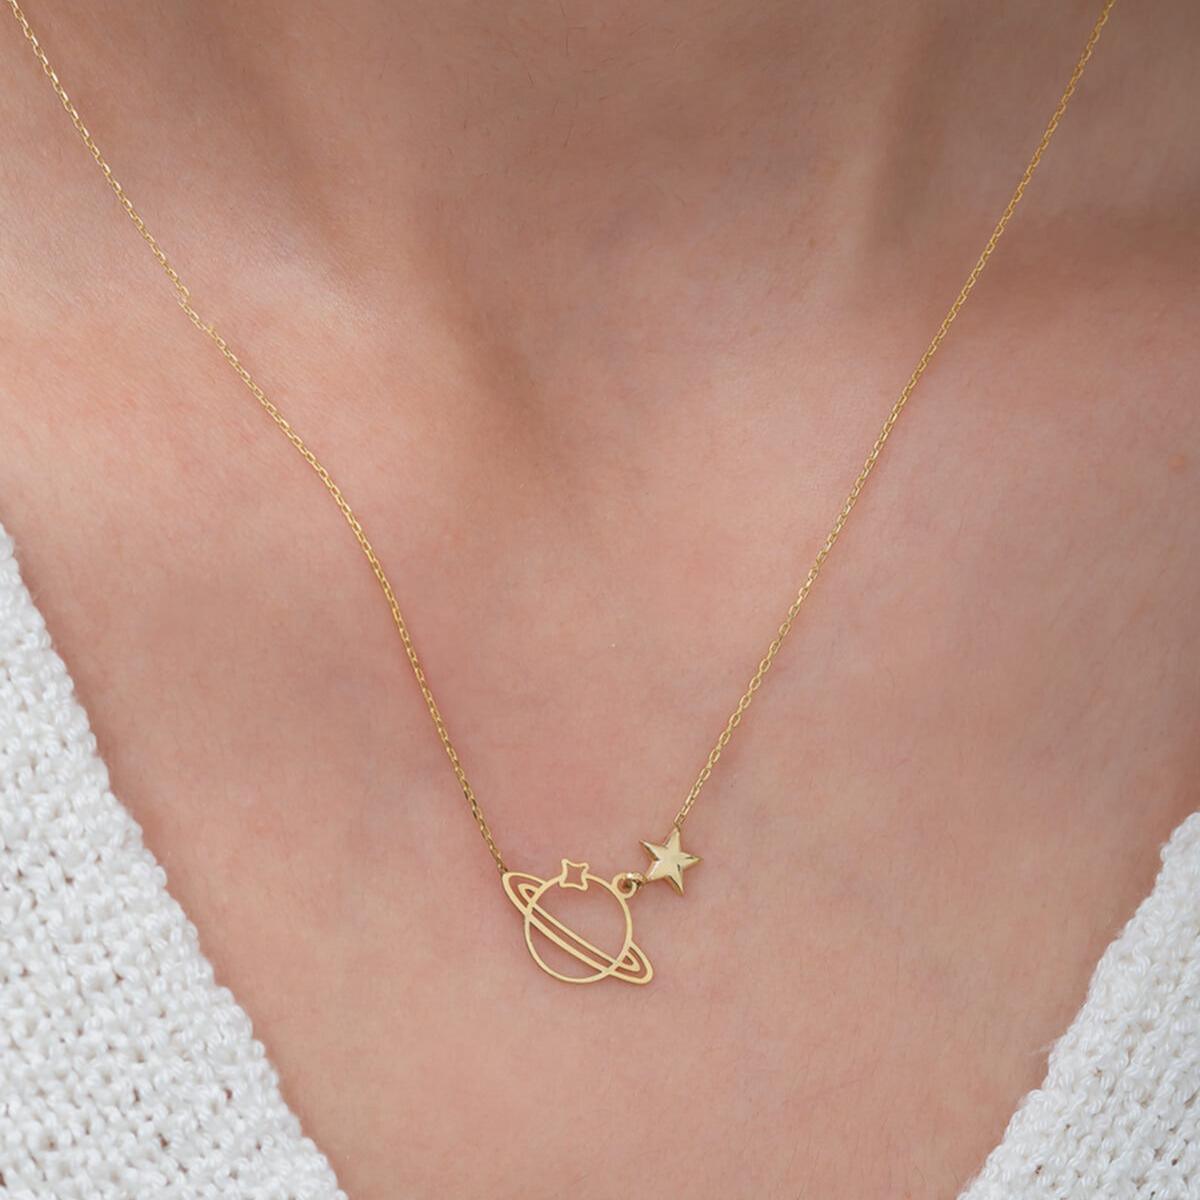 Gold Planet Necklace • Saturn Pendant Necklace • Nana Saturn Necklace - Trending Silver Gifts